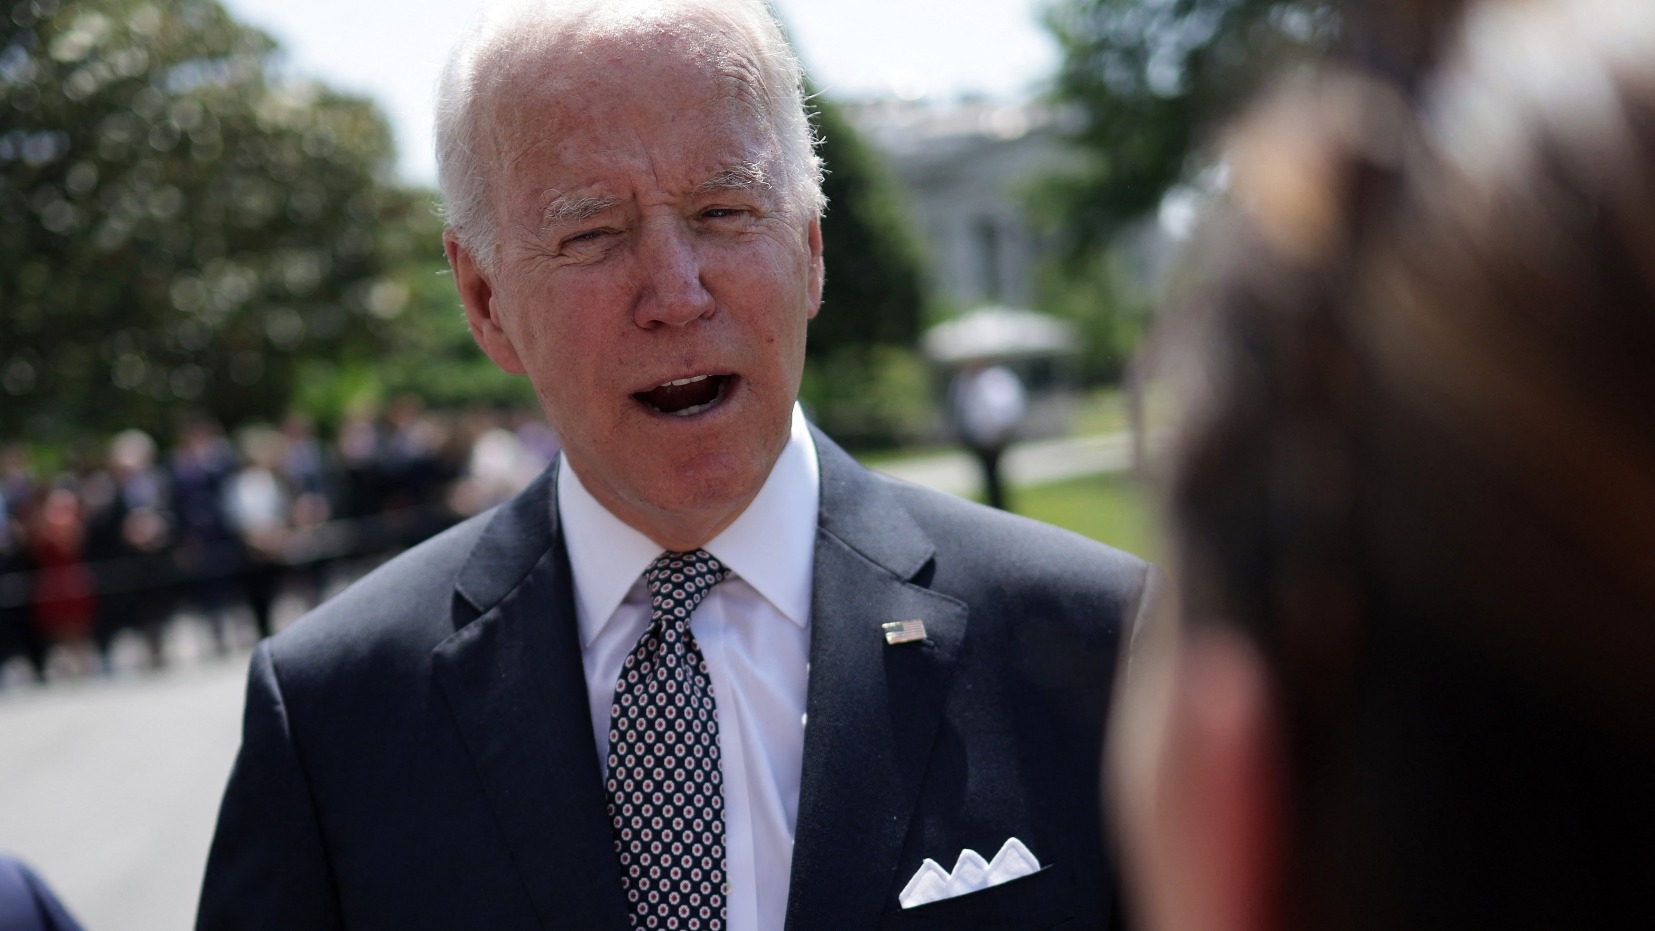 US President Joe Biden speaks to members of the press prior to a Marine One departure from the White House on 17 June 2022 in Washington.